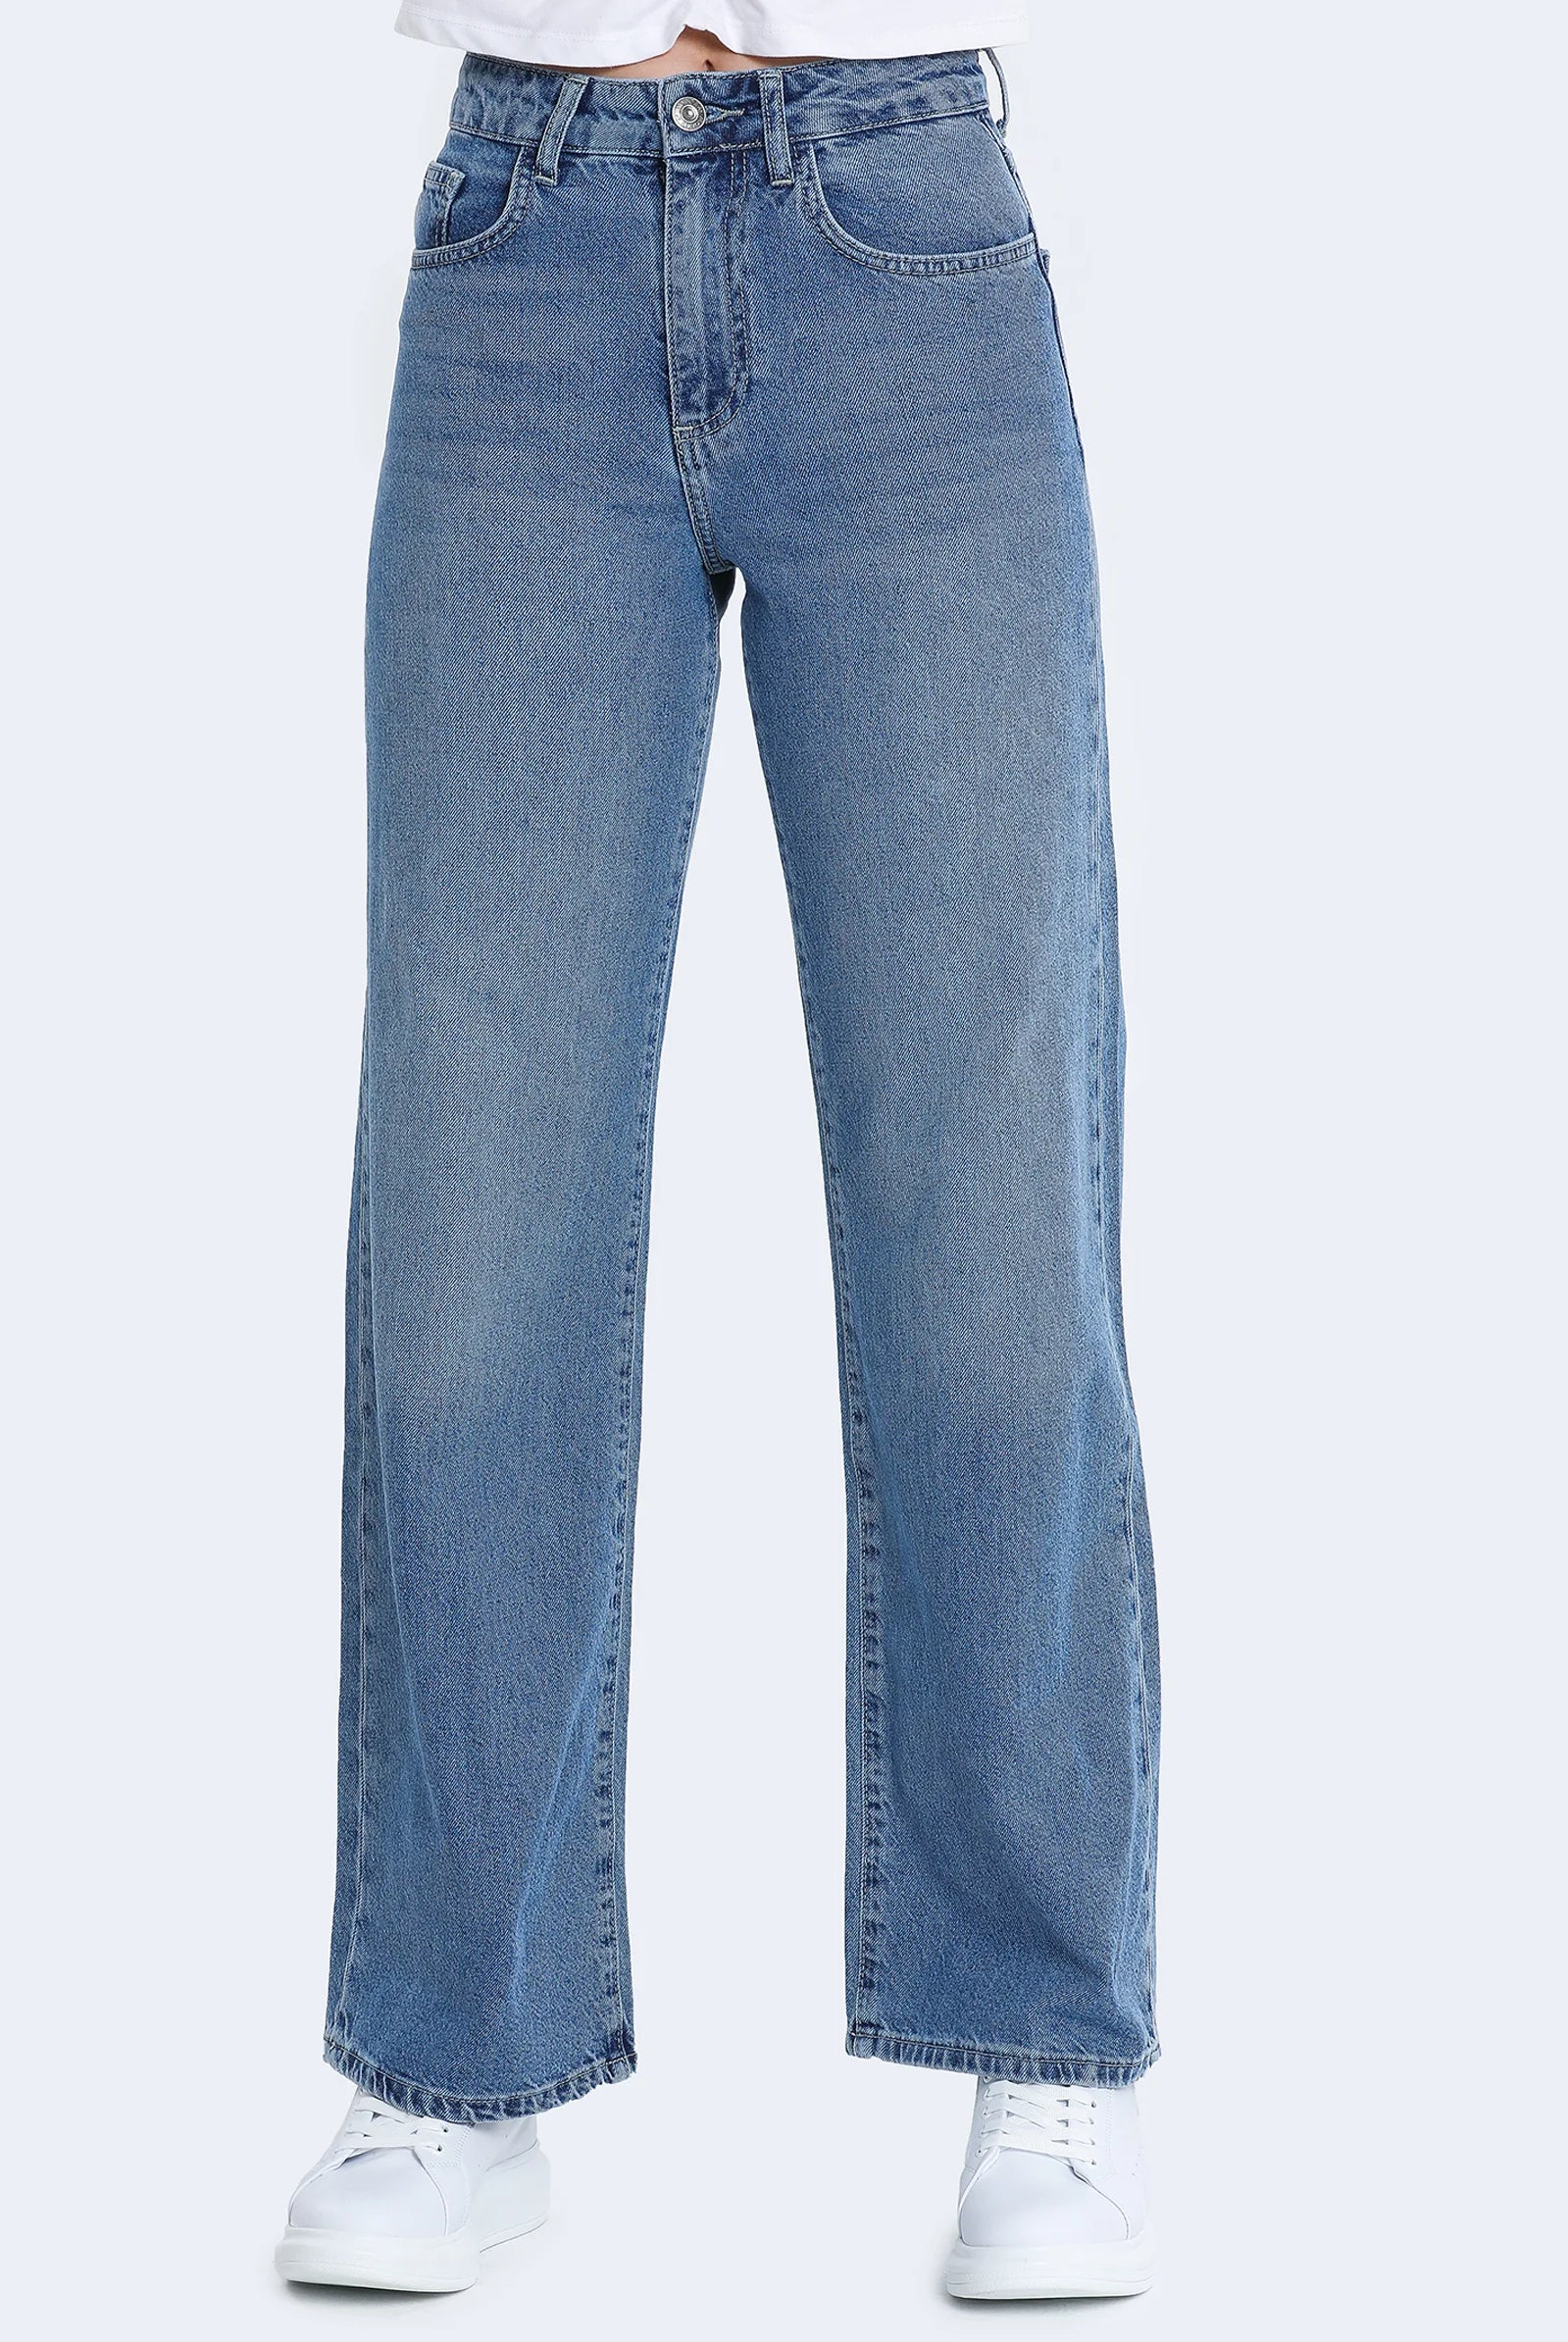 blue hourglass jeans